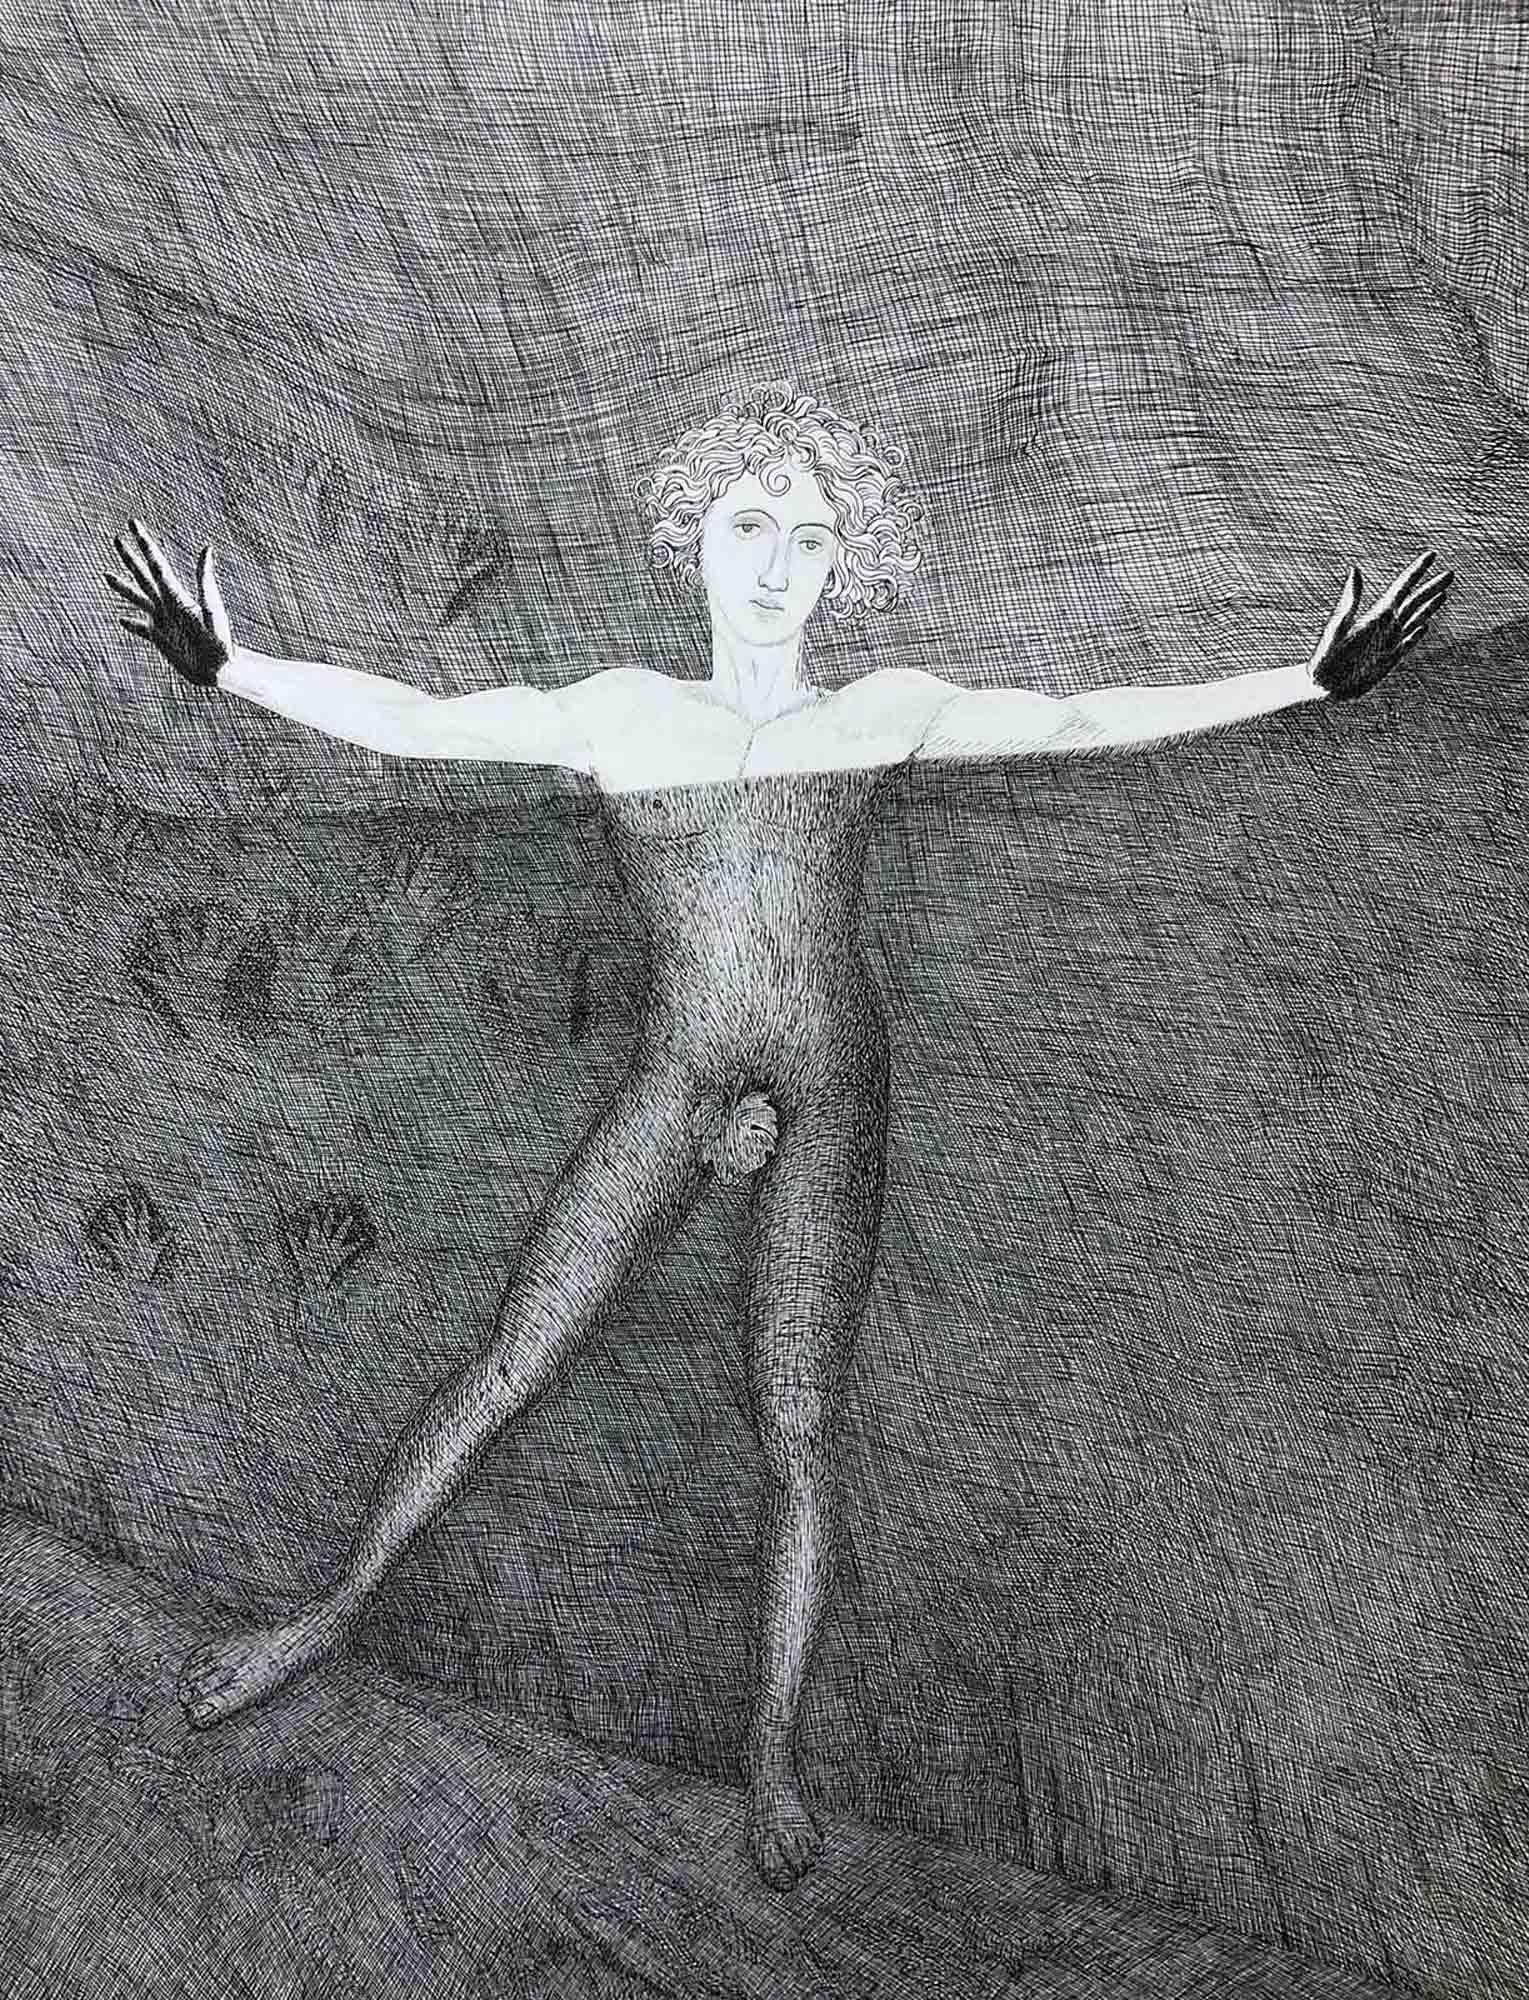 Pen and ink drawing by Mark Alexander; ethereal figure with curly hair spreads arms amidst textured background.